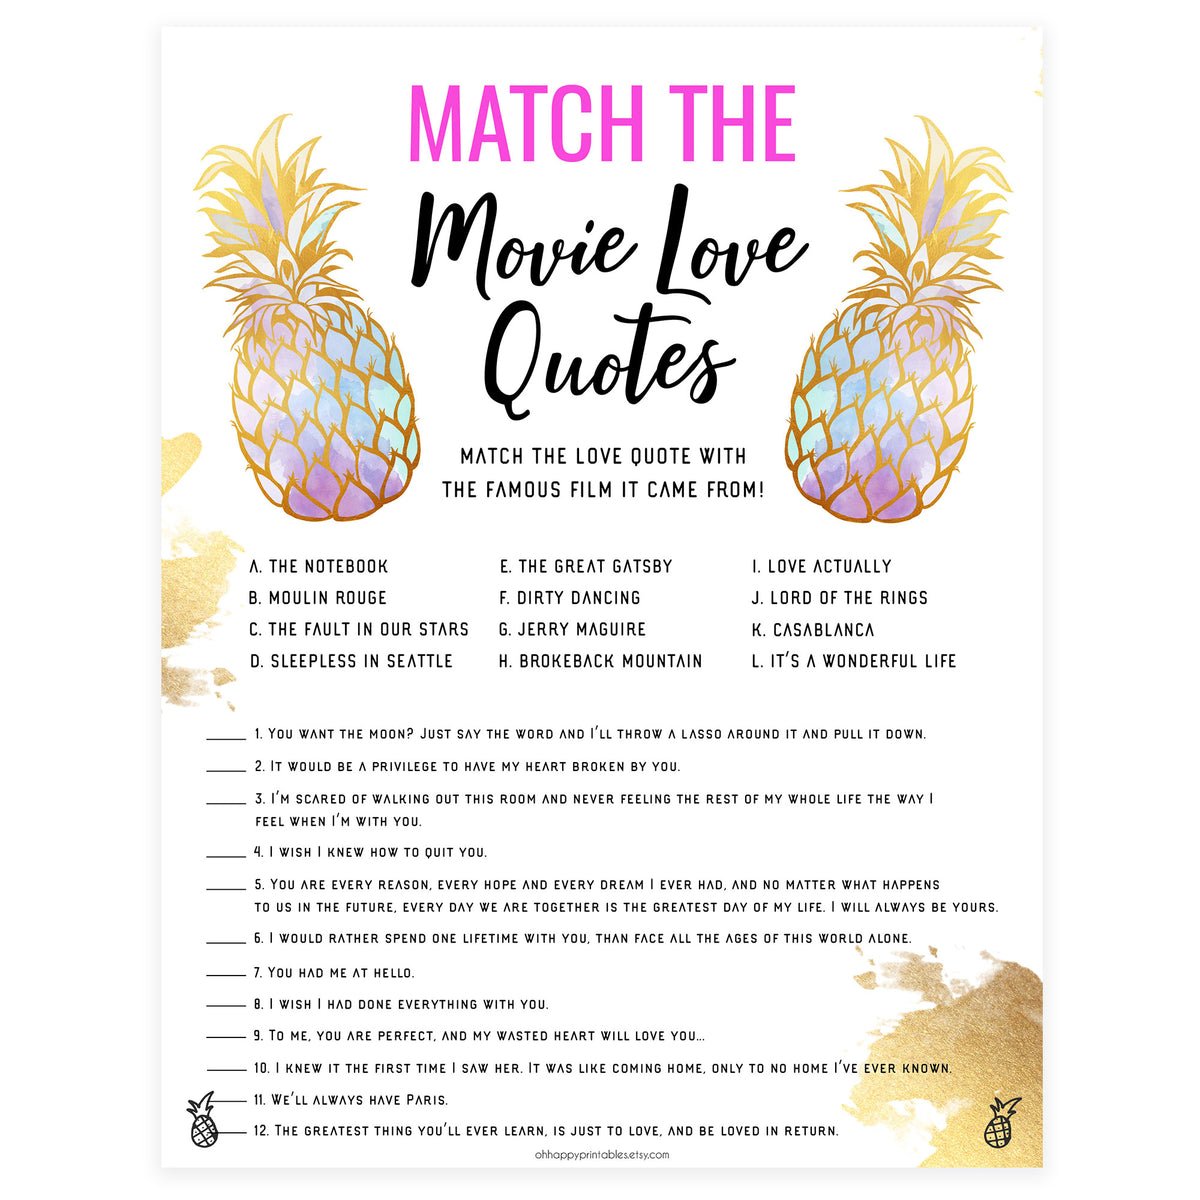 Match the Movie Love Quotes - Gold Pineapple